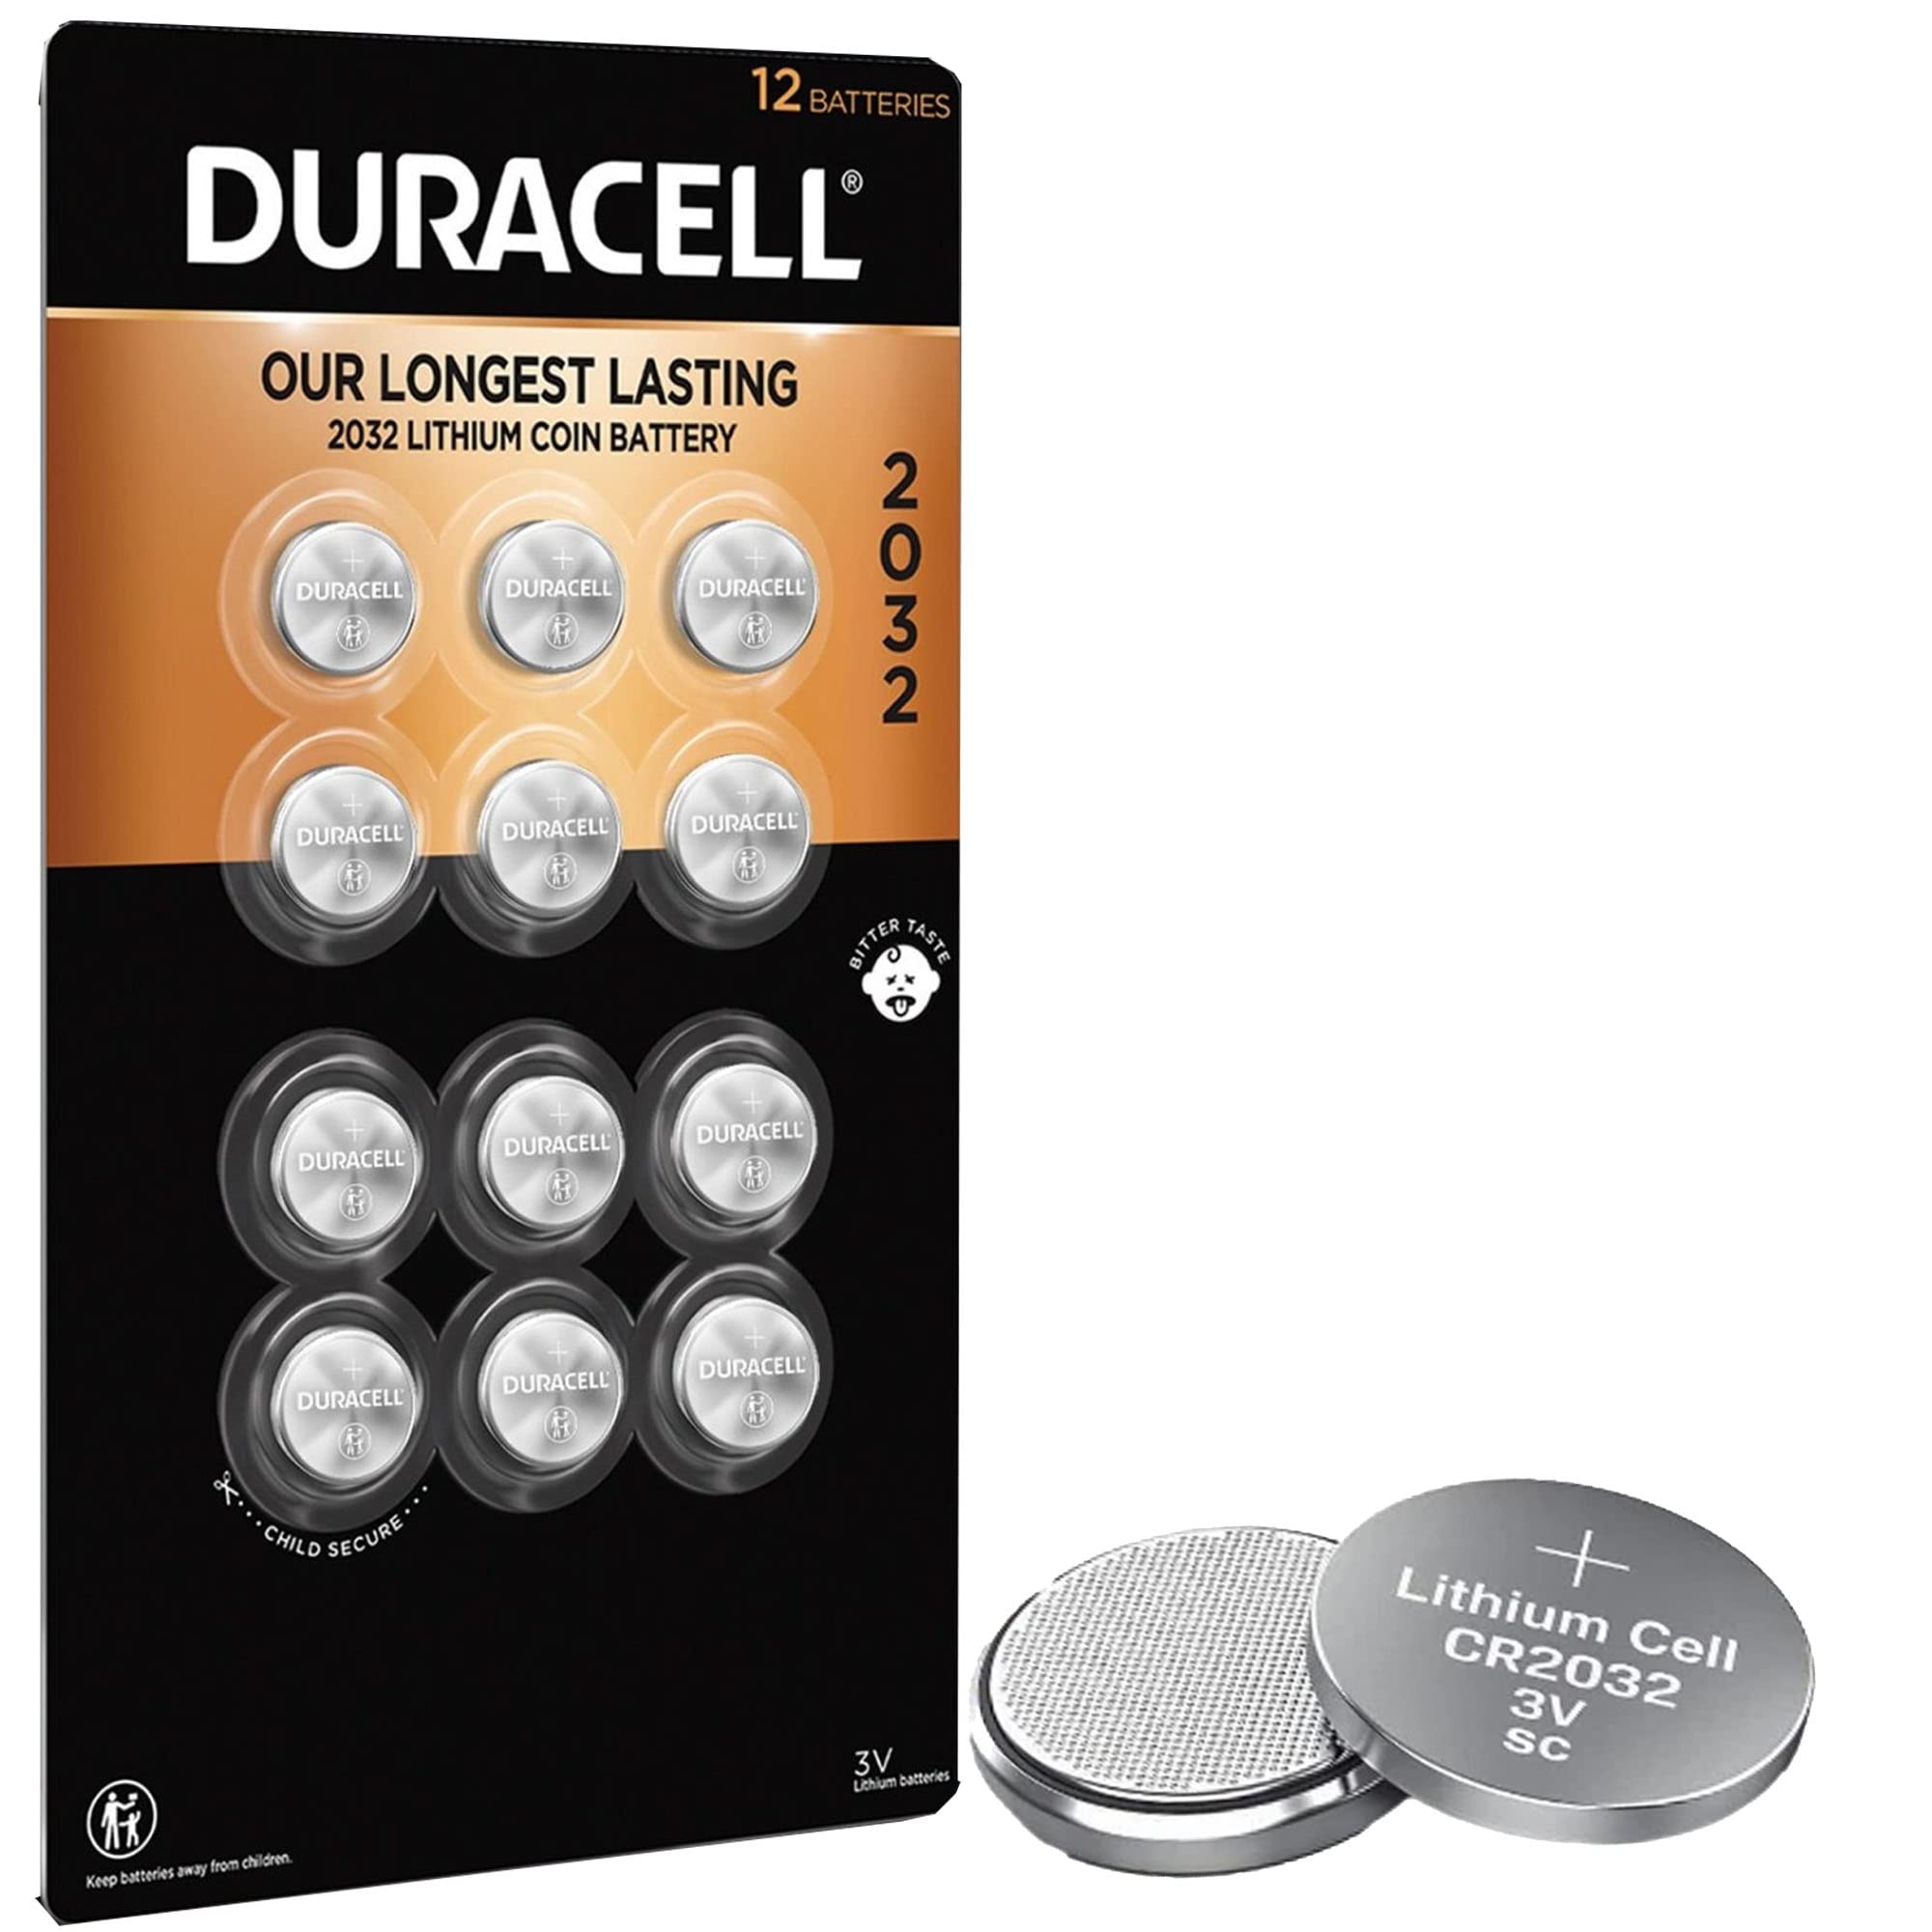 Duracell CR2032 3V Lithium Battery, Child Safety Features, 12 Count Pack,  Lithium Coin Battery for Key